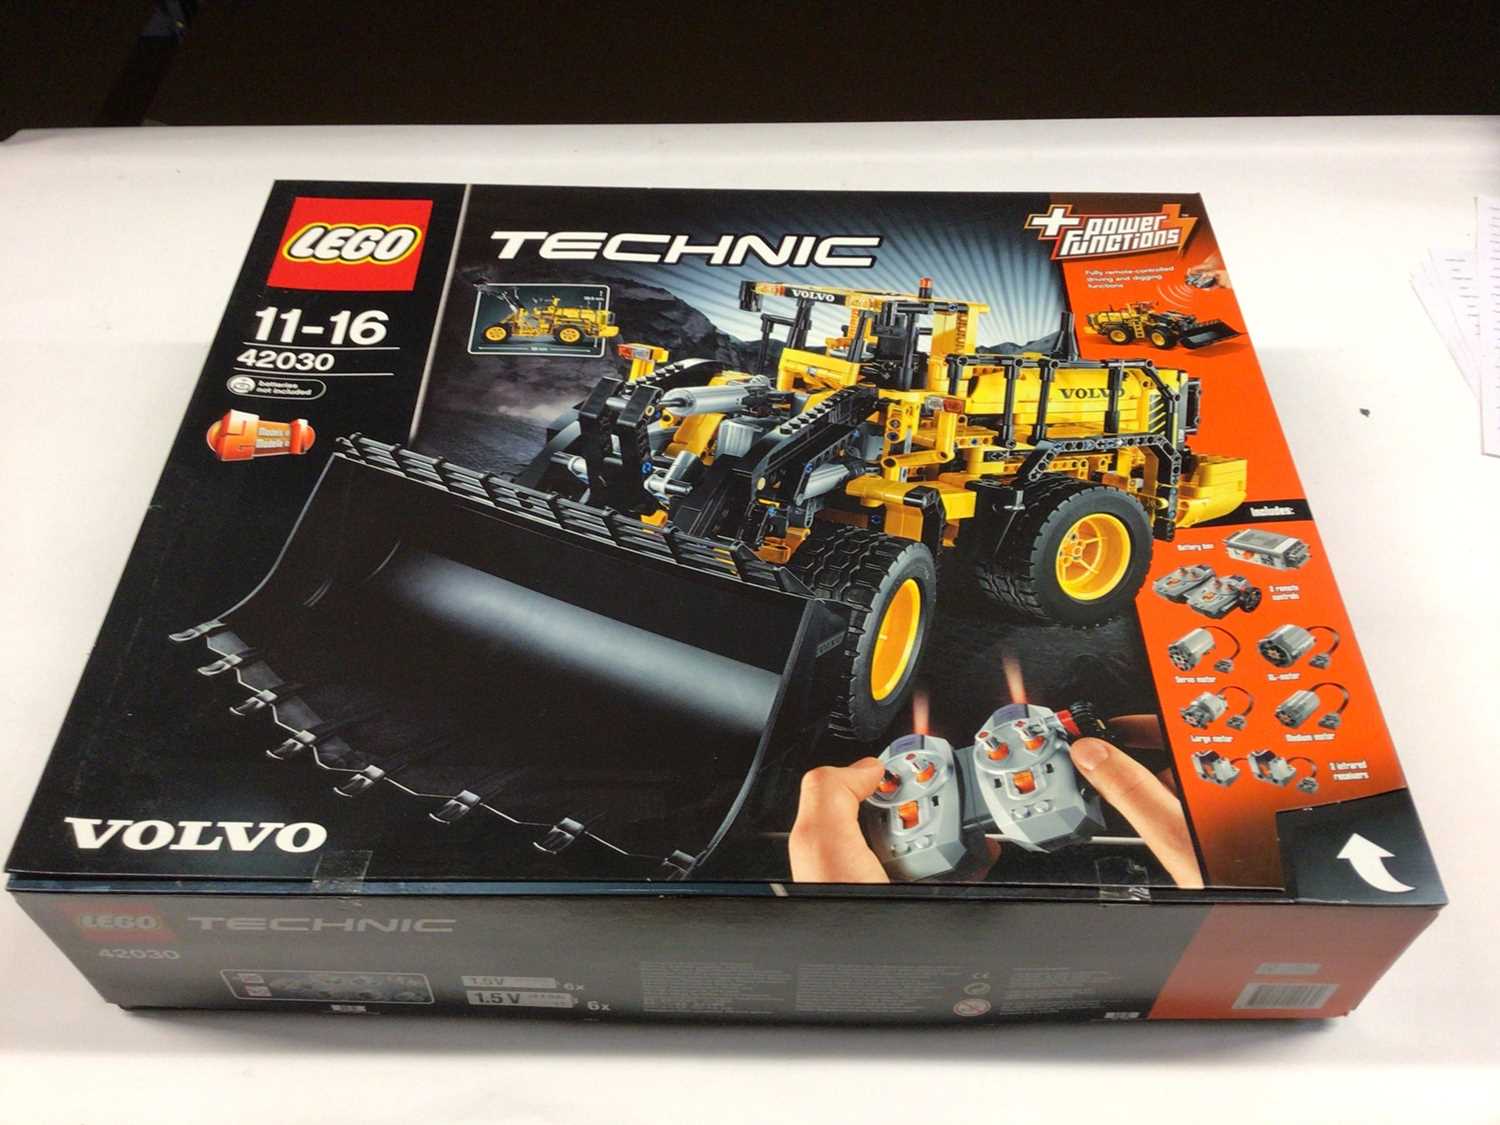 Lot 49 - Lego Technic 42030 Volvo Wheel Loader with instructions, Boxed